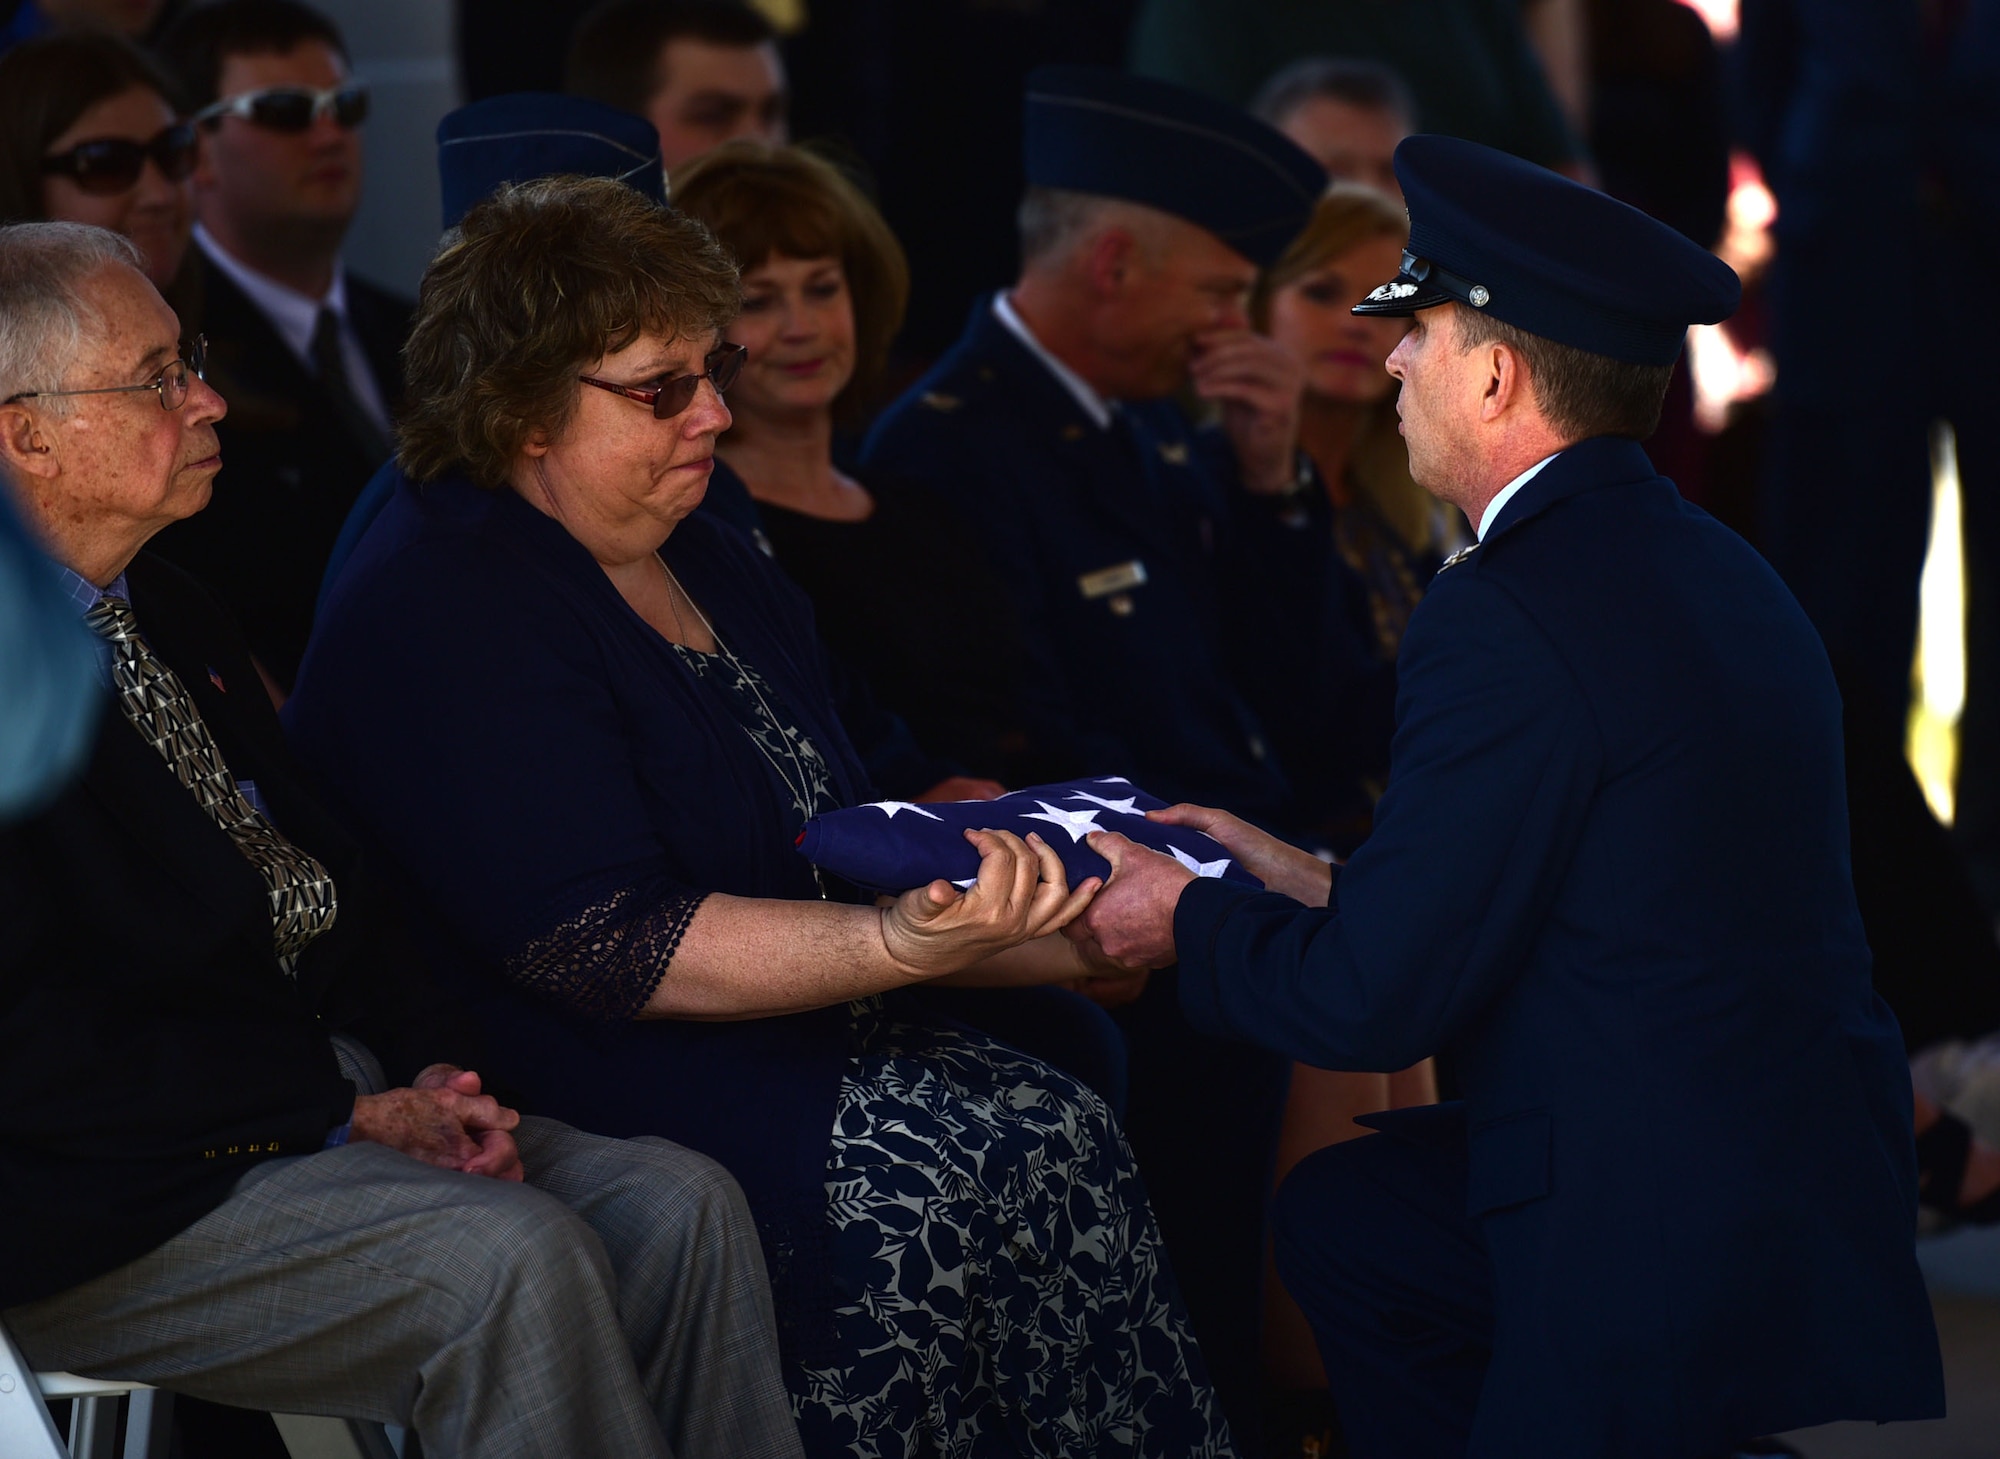 A Seymour Johnson Air Force Base Honor Guardsmen presents a flag in honor of Col. Edgar Davis to his daughter, Martha Morton, during his funeral ceremony April 6, 2018, Goldsboro, North Carolina. Davis was shot down during a night photo-reconnaissance mission over Laos during the Vietnam War. After initial rescue efforts were unsuccessful, he was assumed dead and his remains stayed missing for 50 years. (U.S. Air Force photo by Senior Airman Christian Clausen)